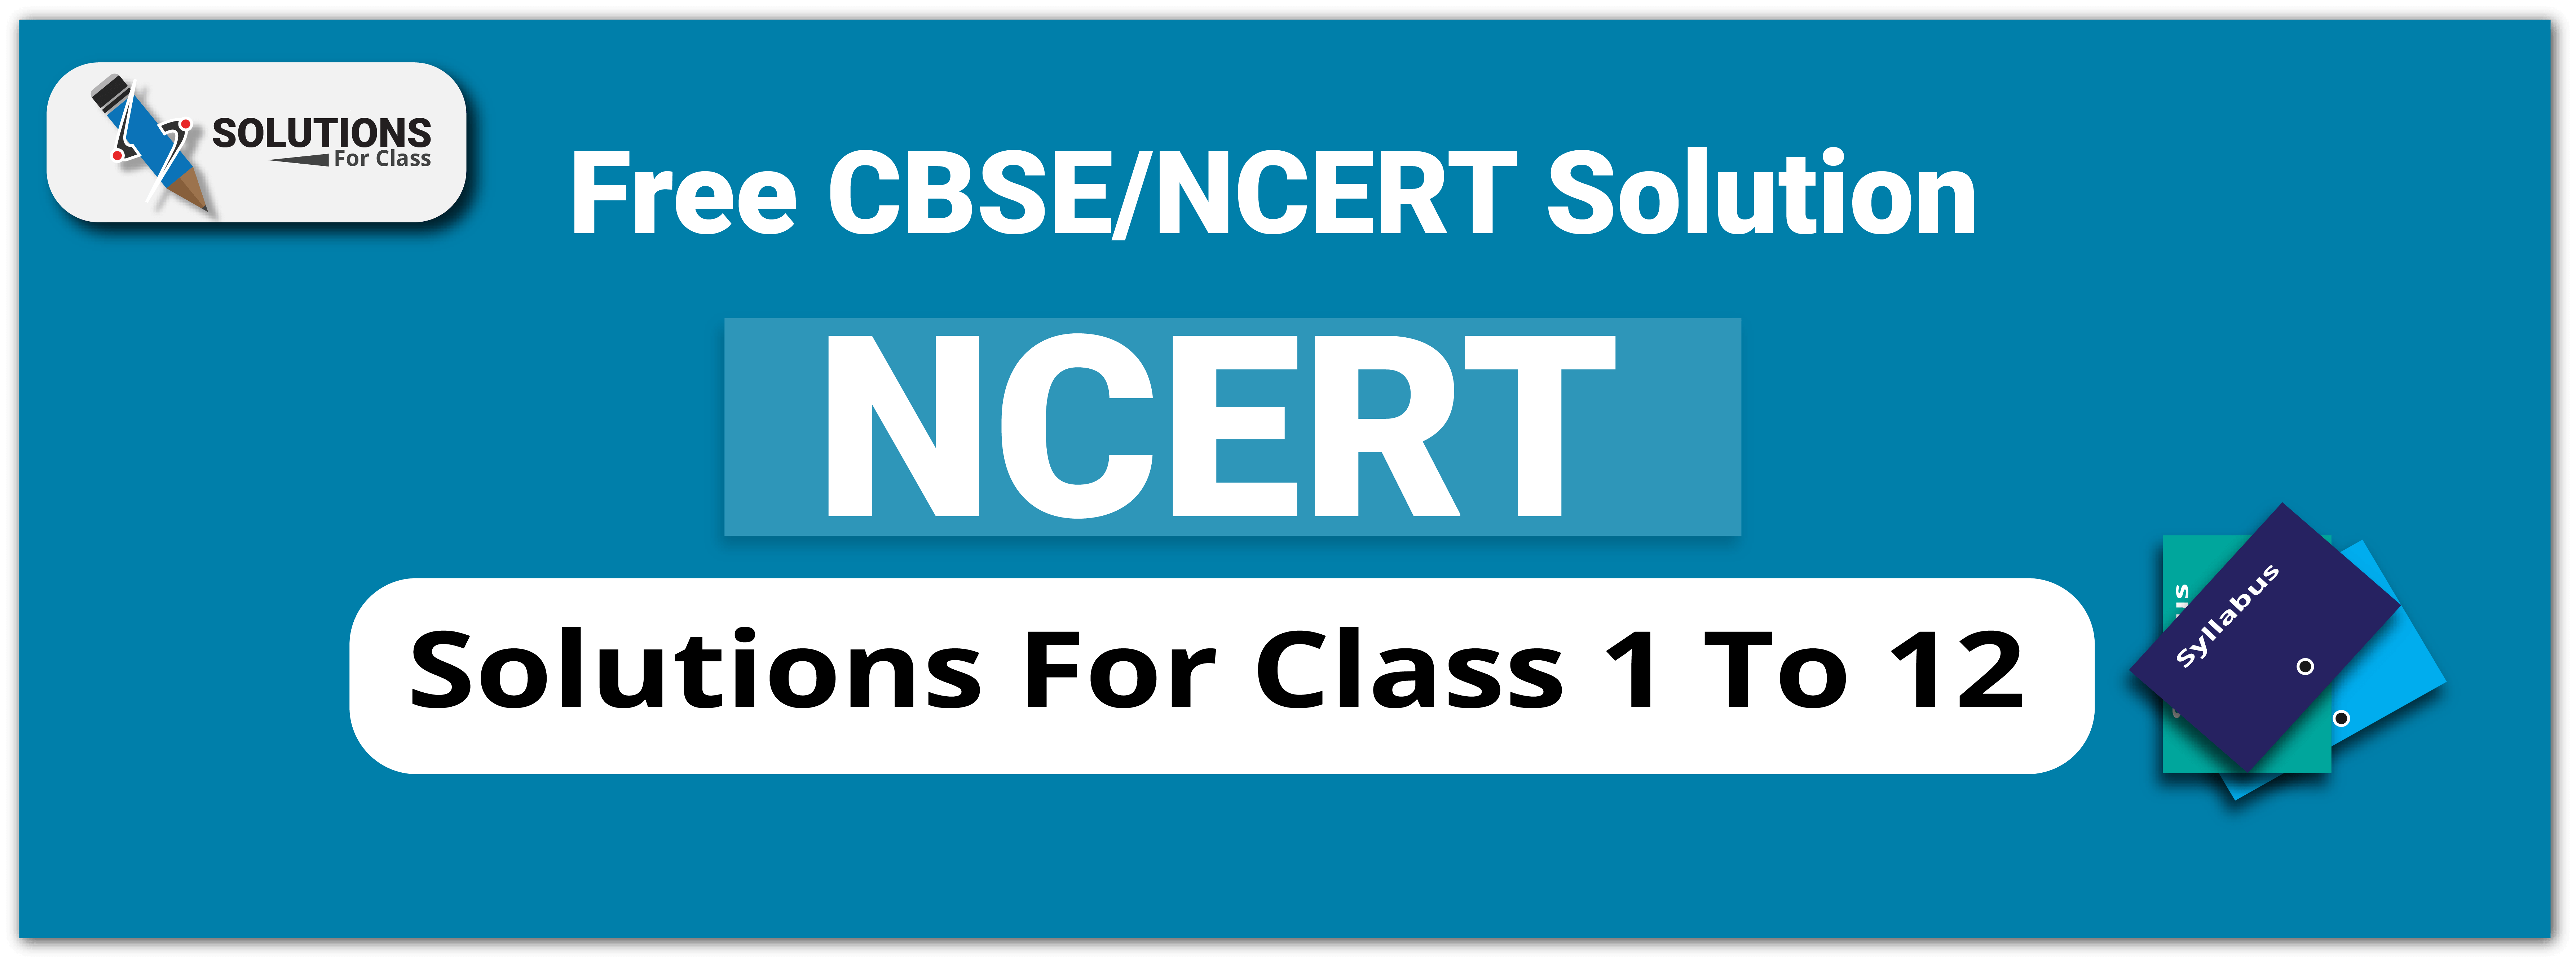 NCERT Solutions For Class 1 To 12 Free CBSE NCERT Solutions